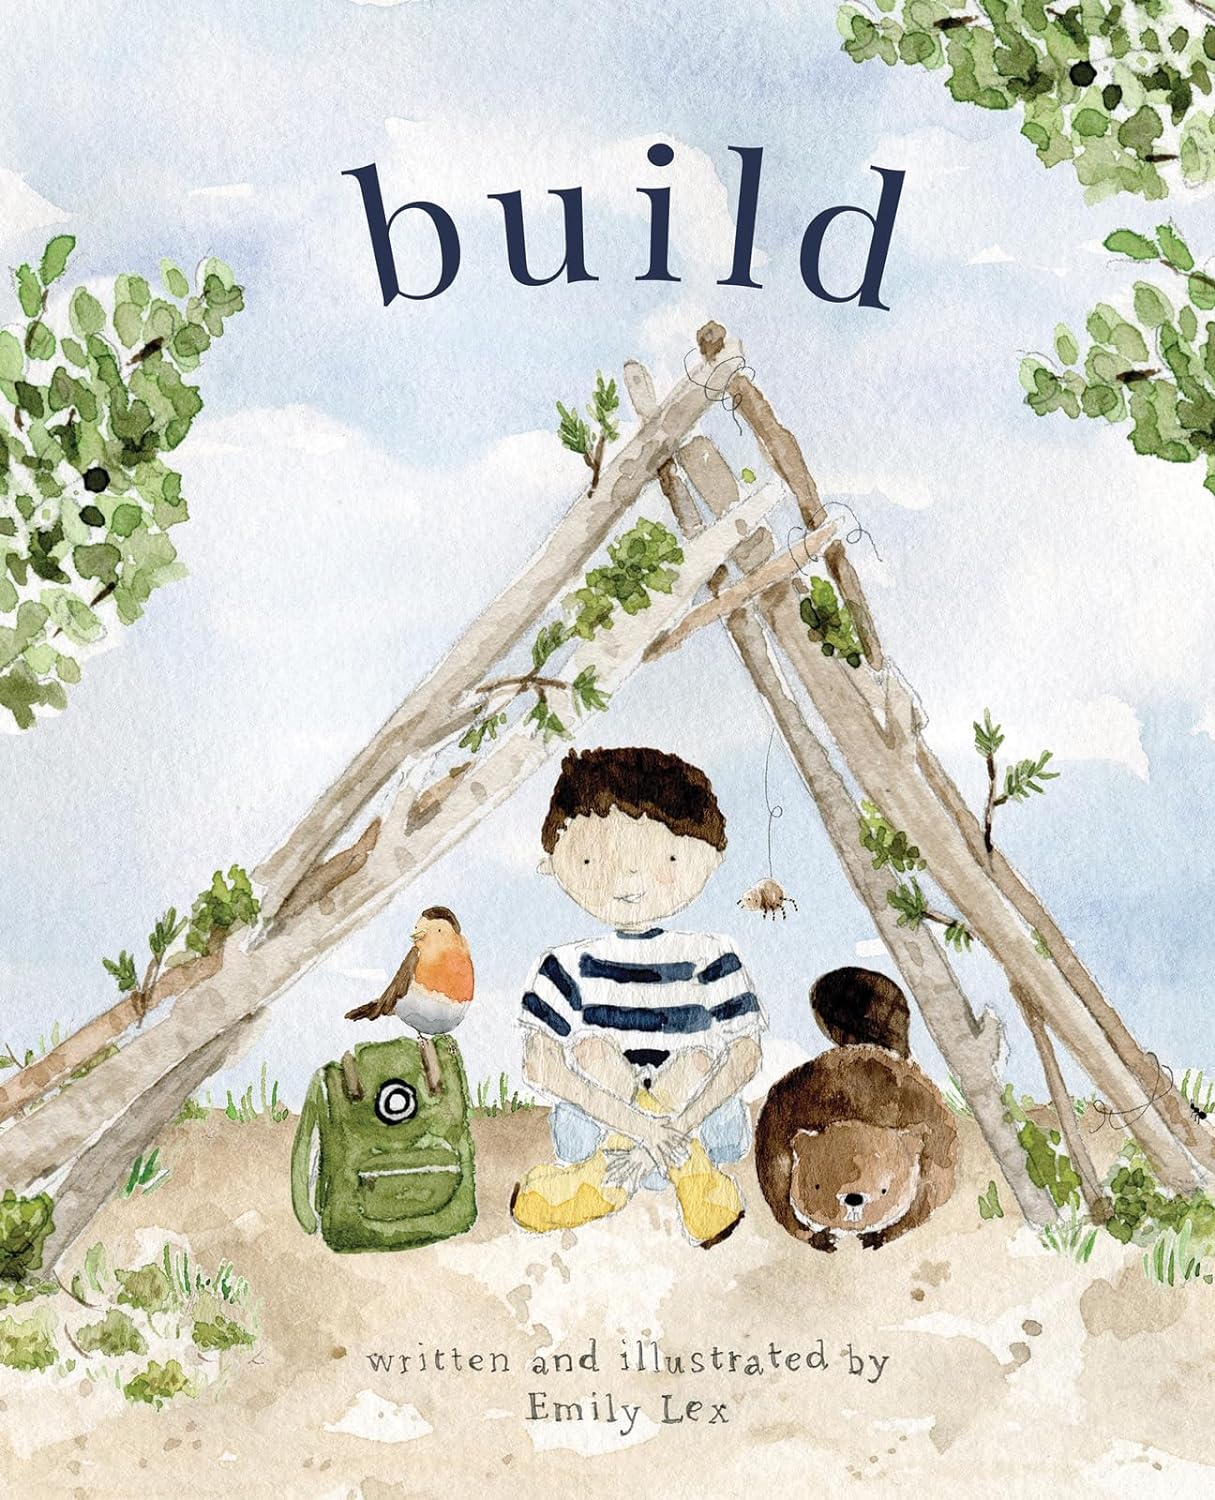 Front cover of children's book called Build written and illustrated by Emily Lex. Christian Kids books. 